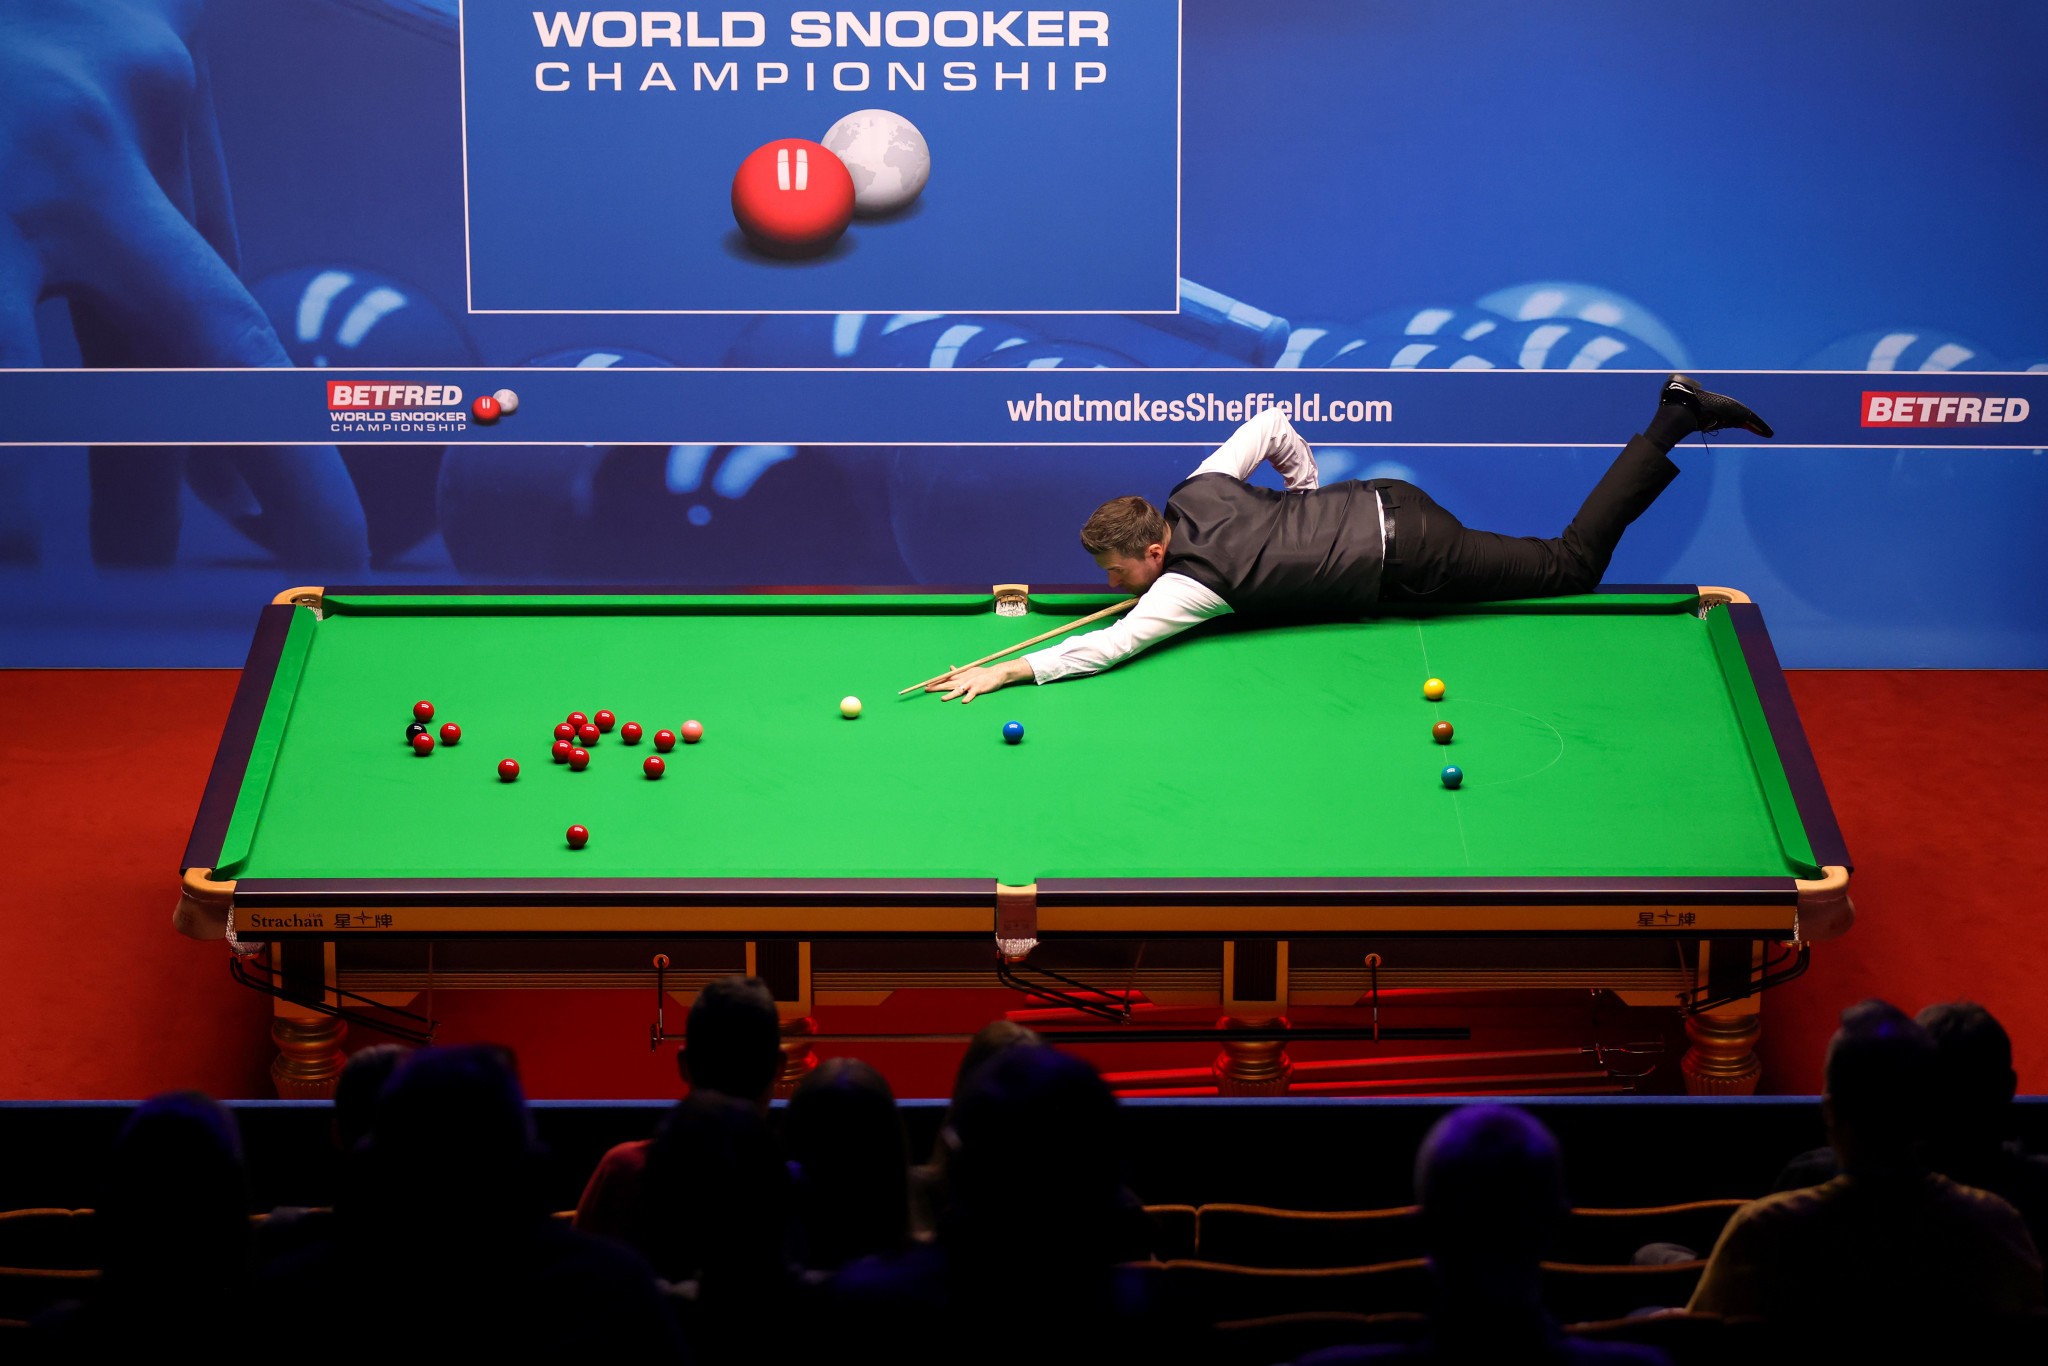 Defending champion Selby claims emotional victory to reach second round of World Snooker Championship 